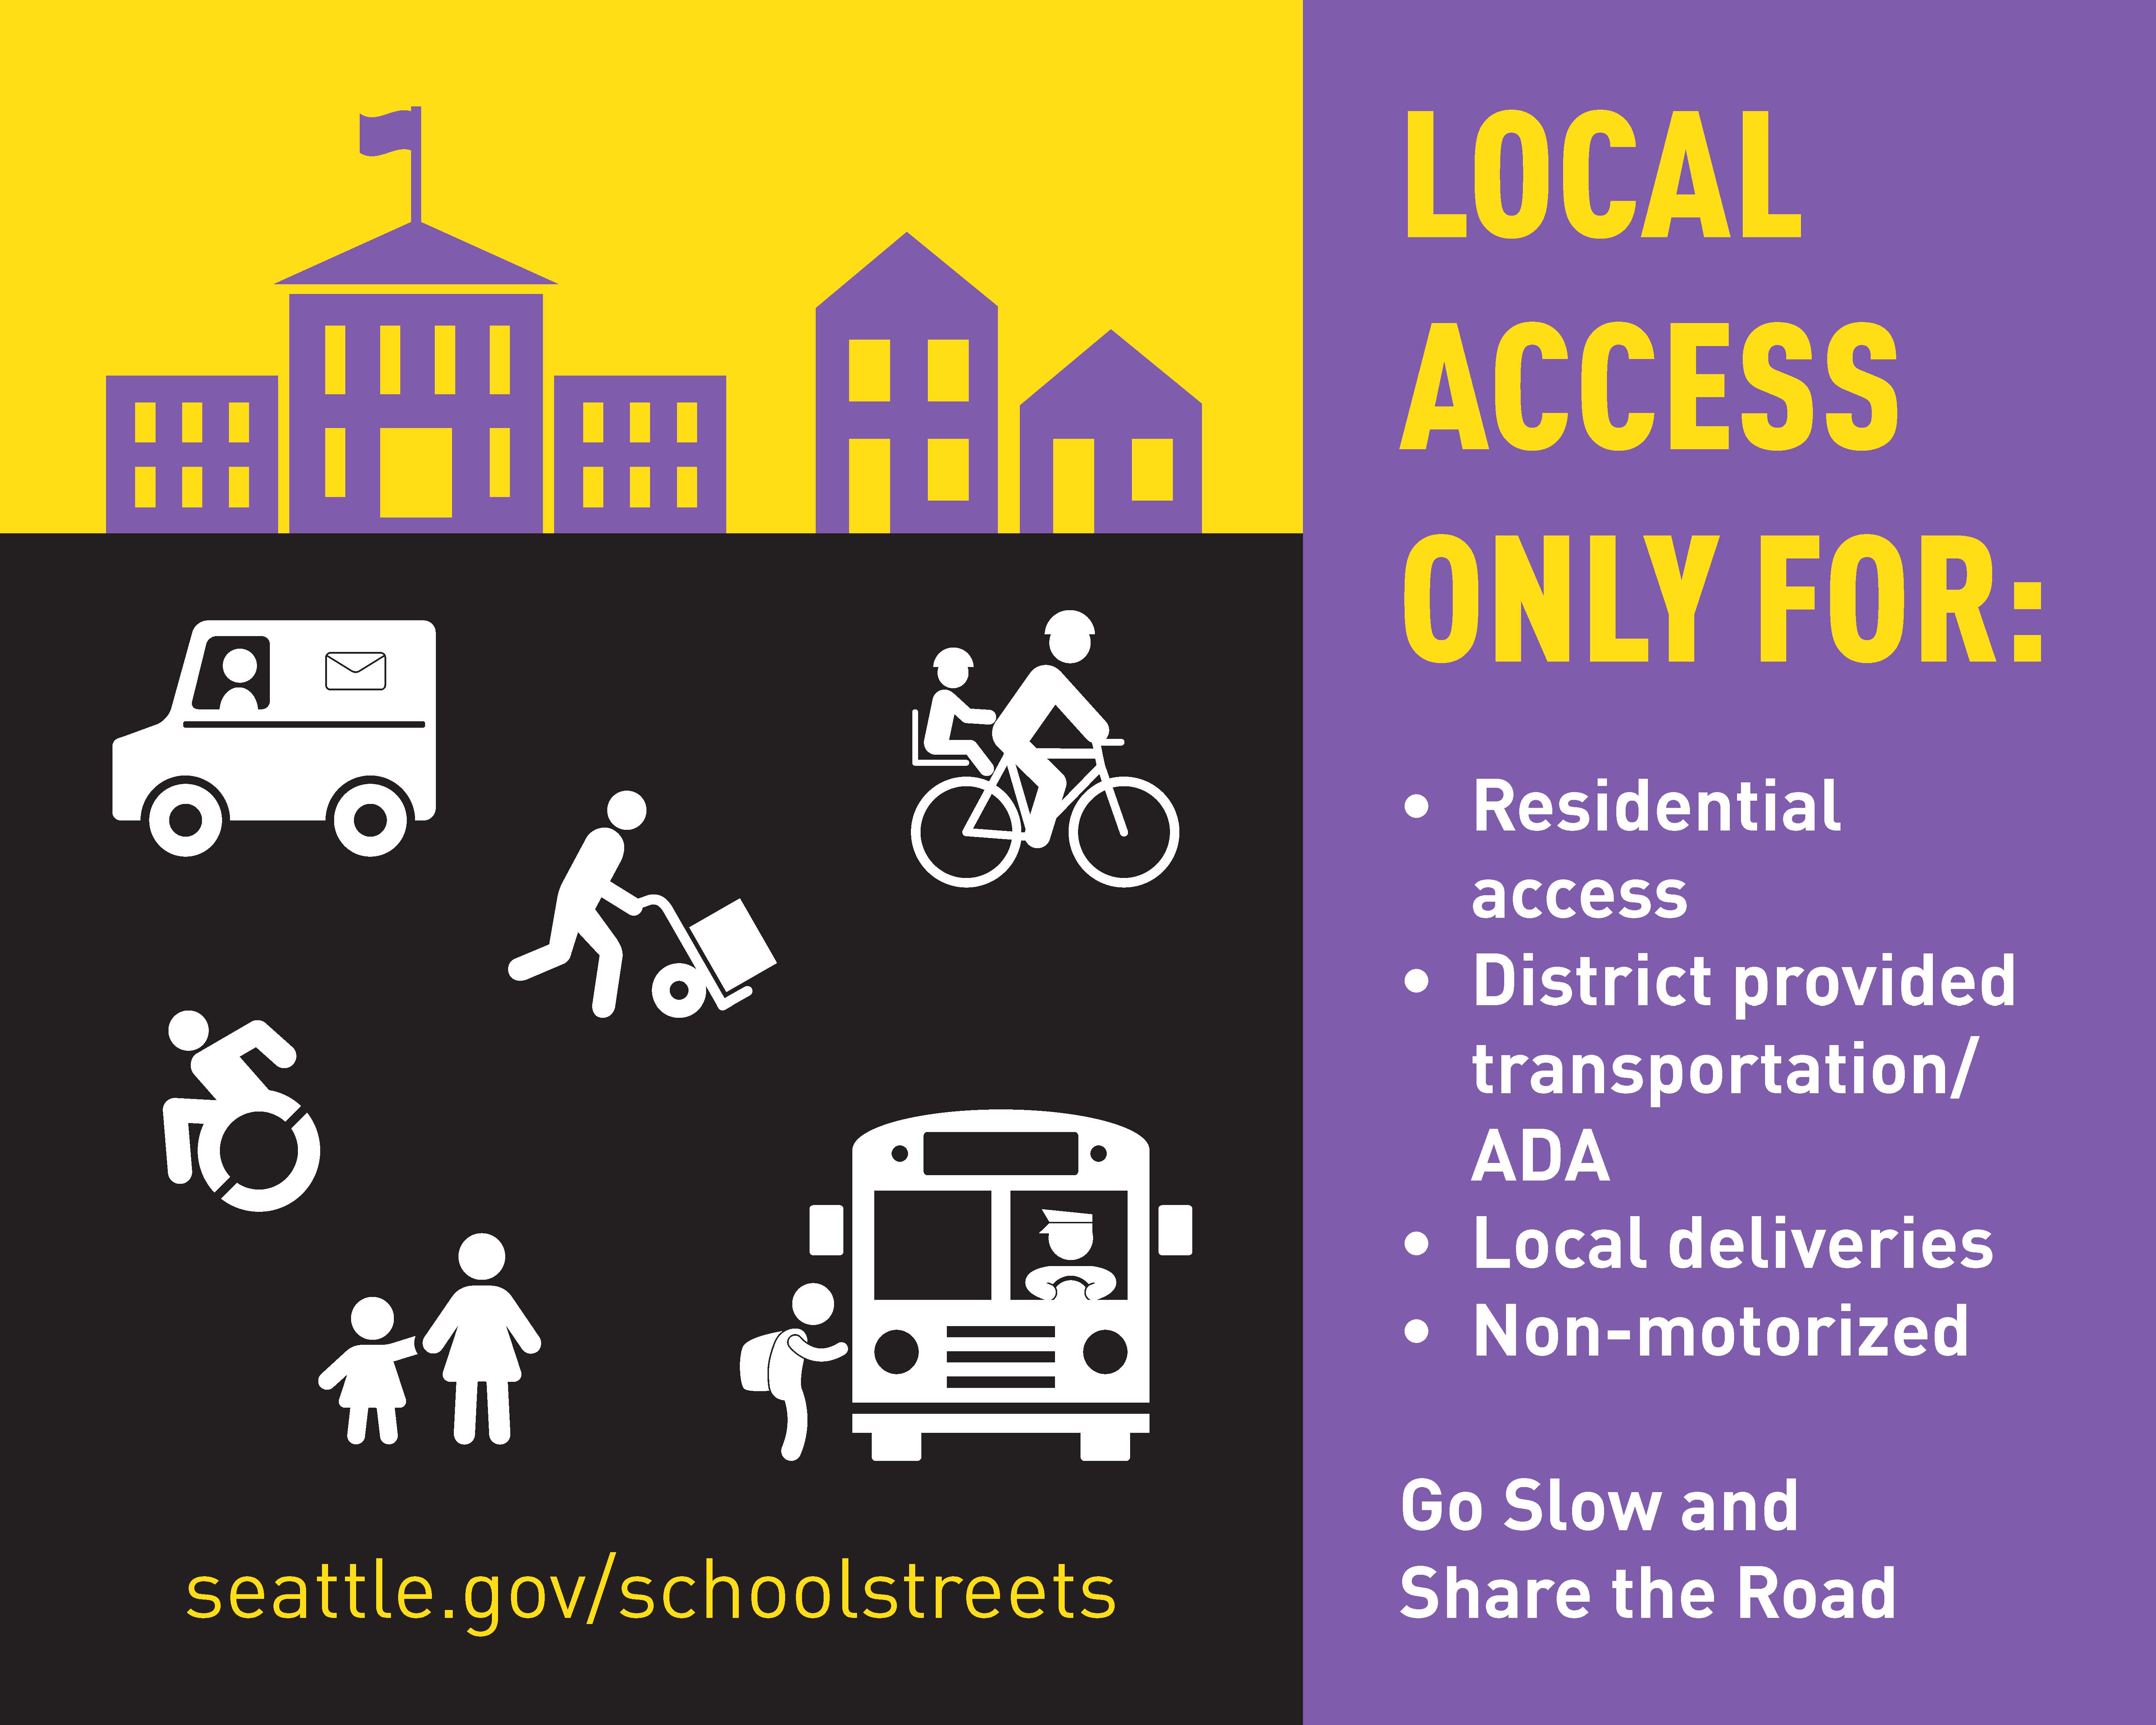 A graphic that describes how School Streets can be used, including for residential access, by district-provided transportation/ADA, for local deliveries, and by non-motorized modes of transportation